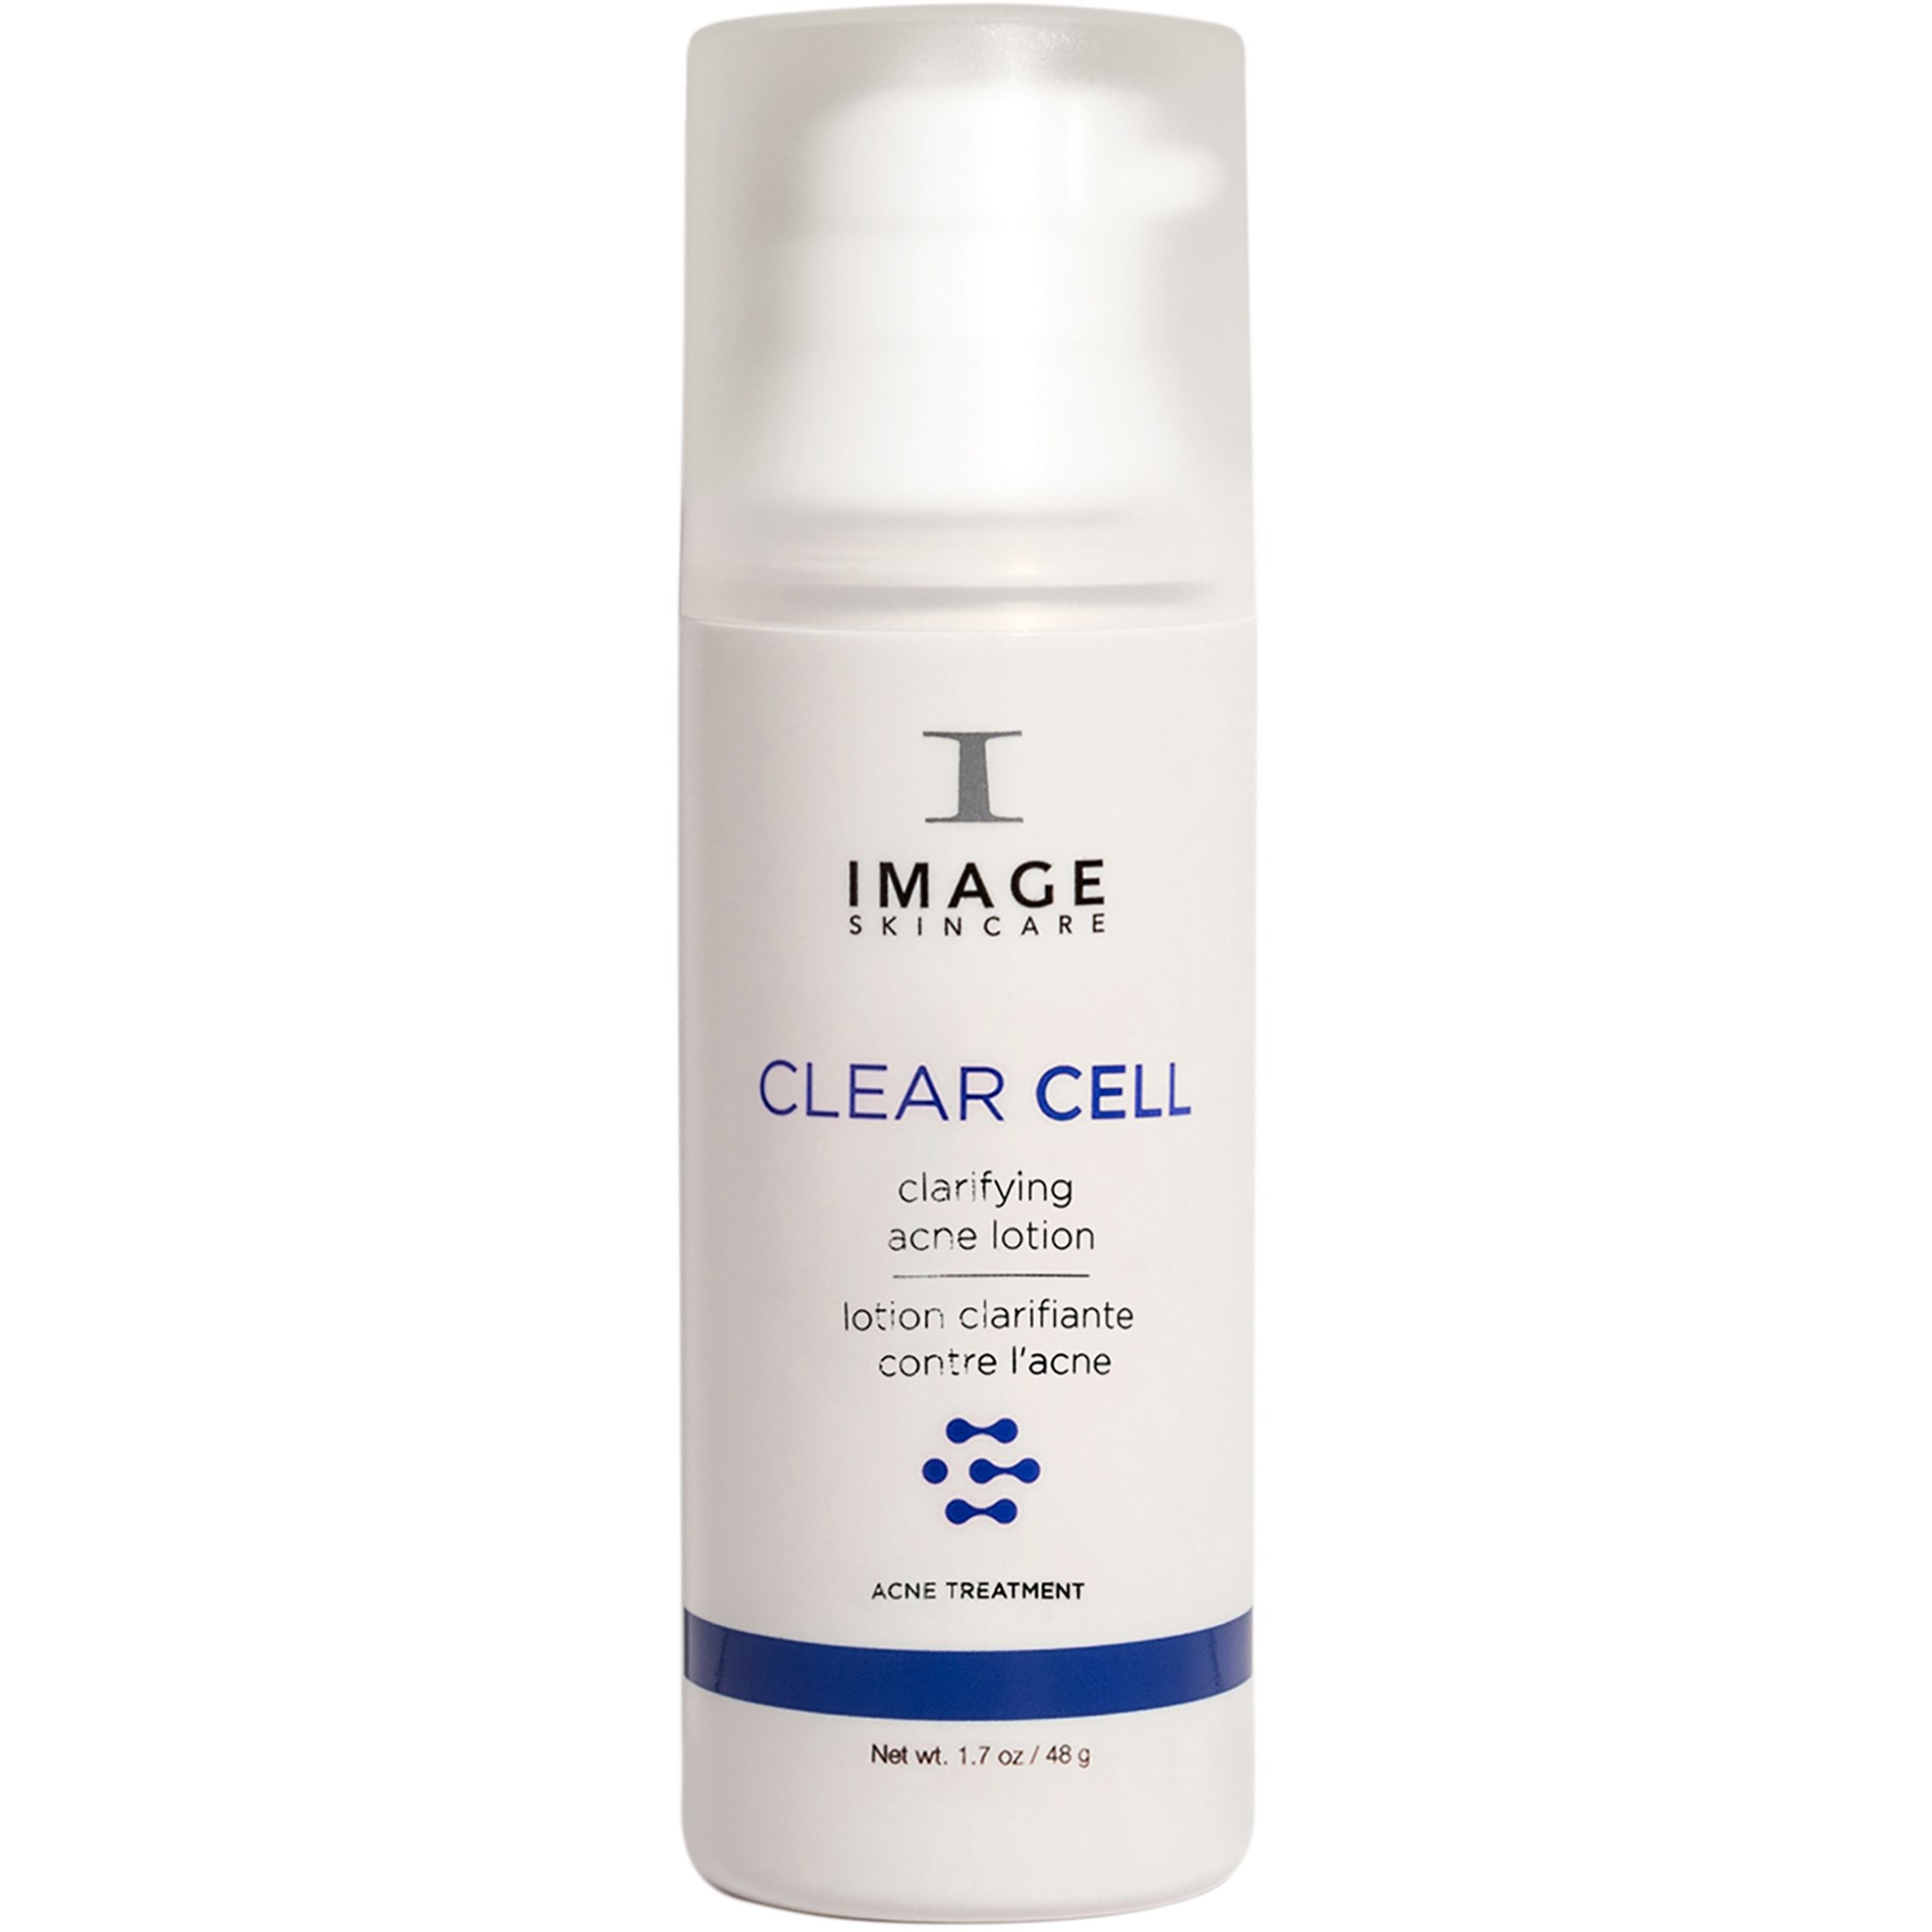 IMAGE Skincare Clear Cell Clarifying Acne Lotion 48 g